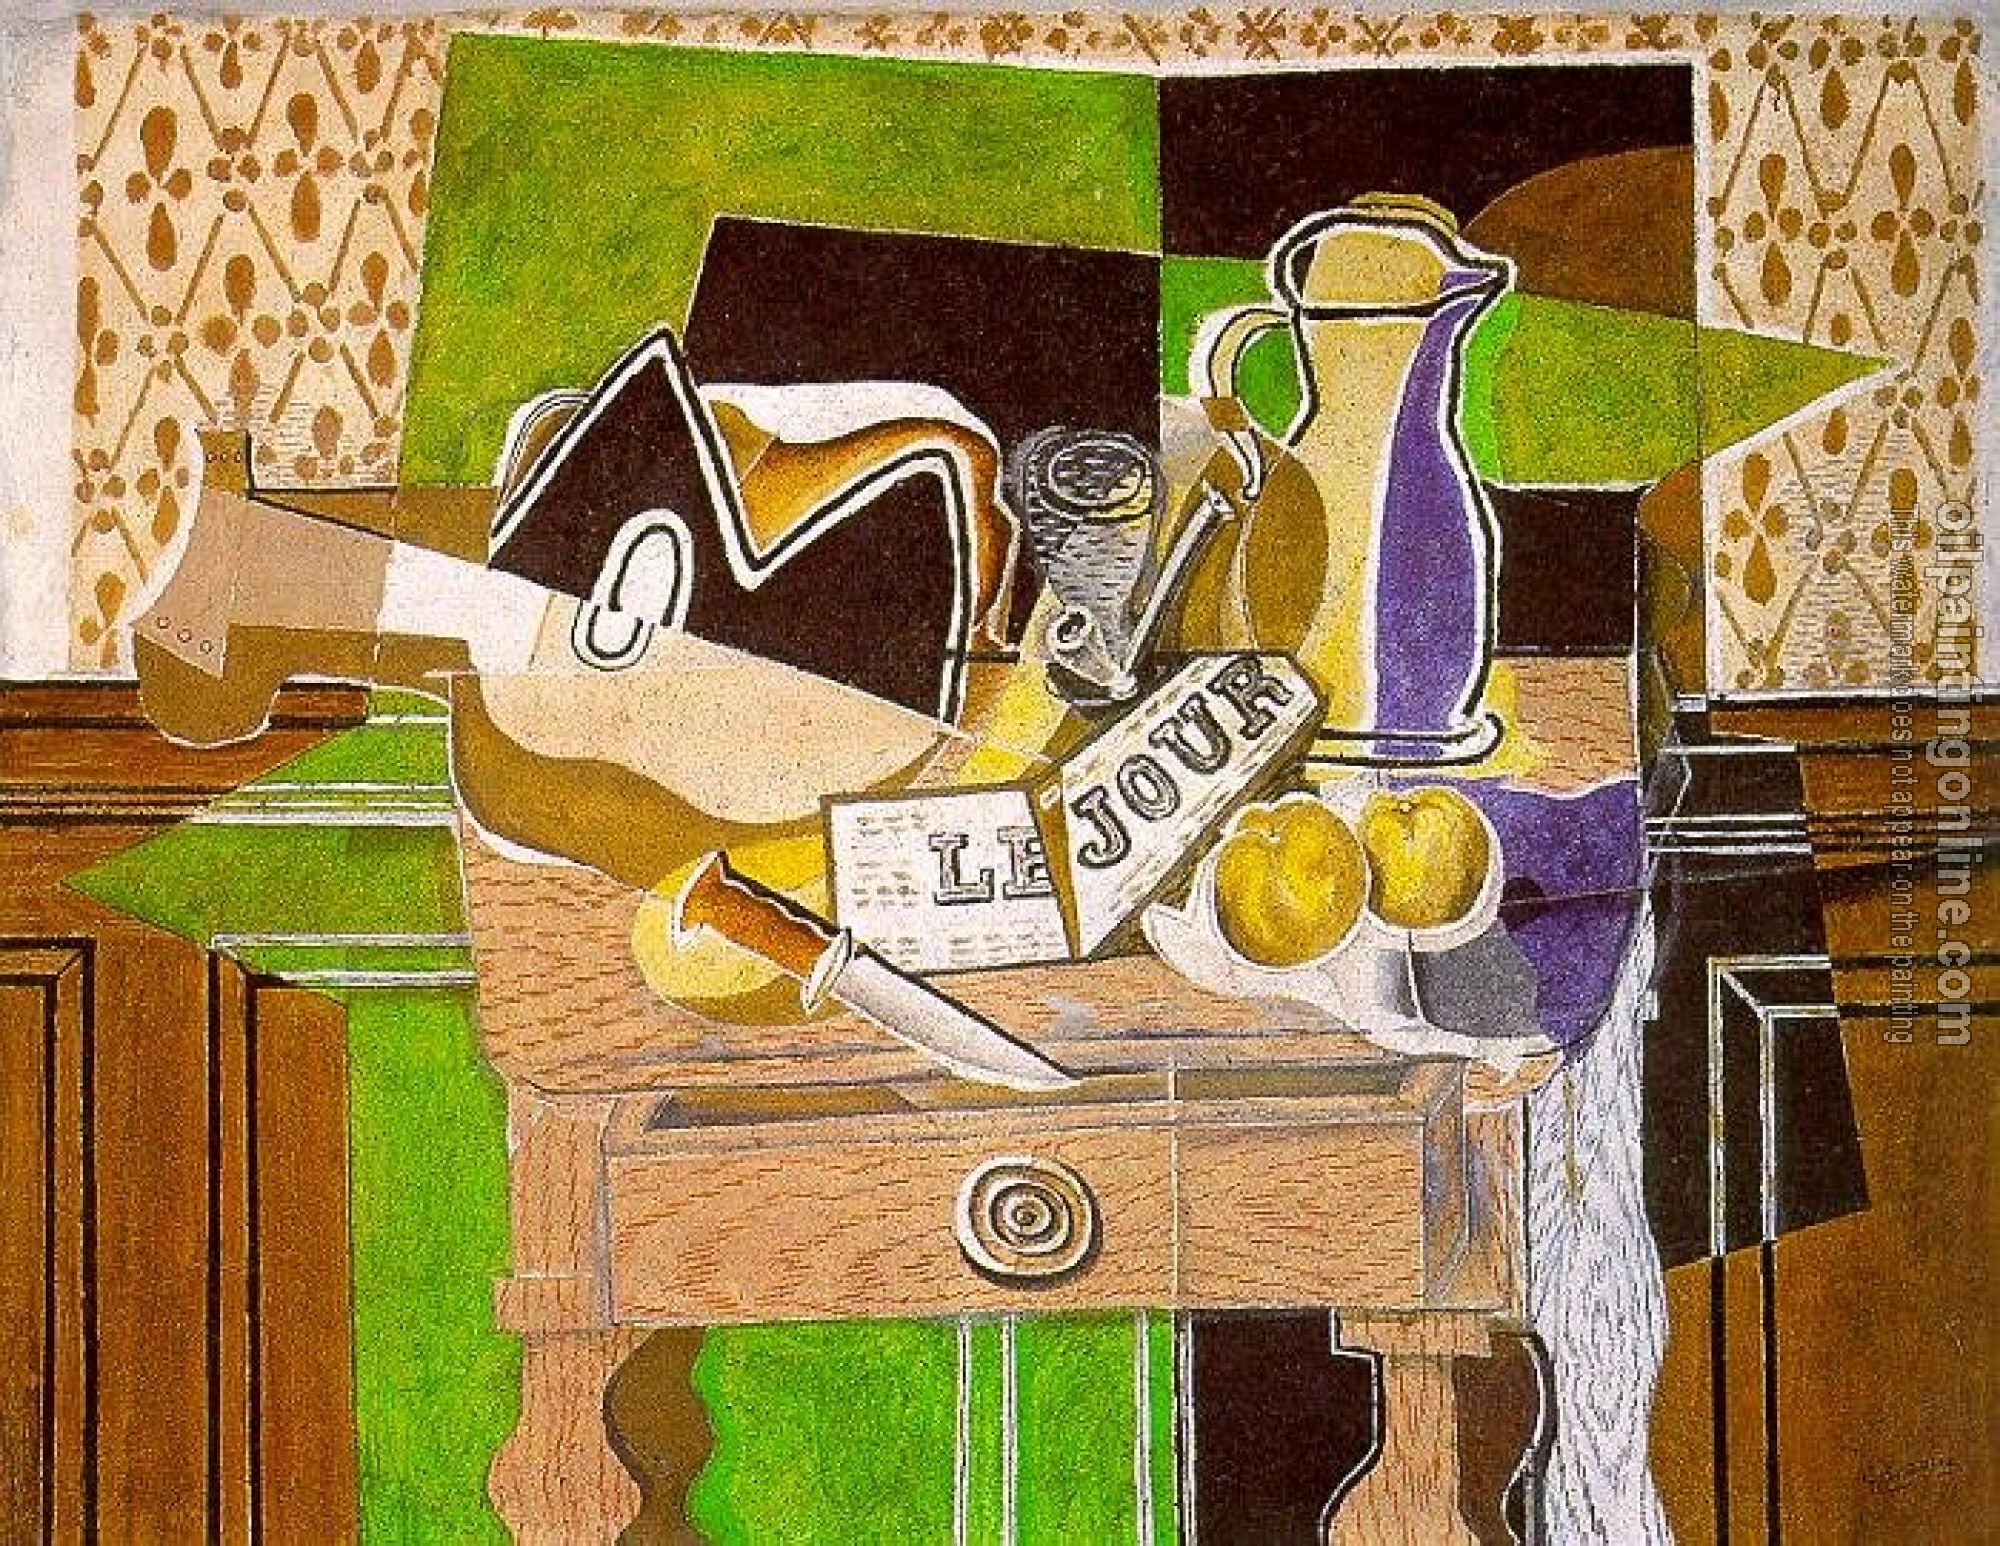 Georges Braque - Still Life with Le Jour